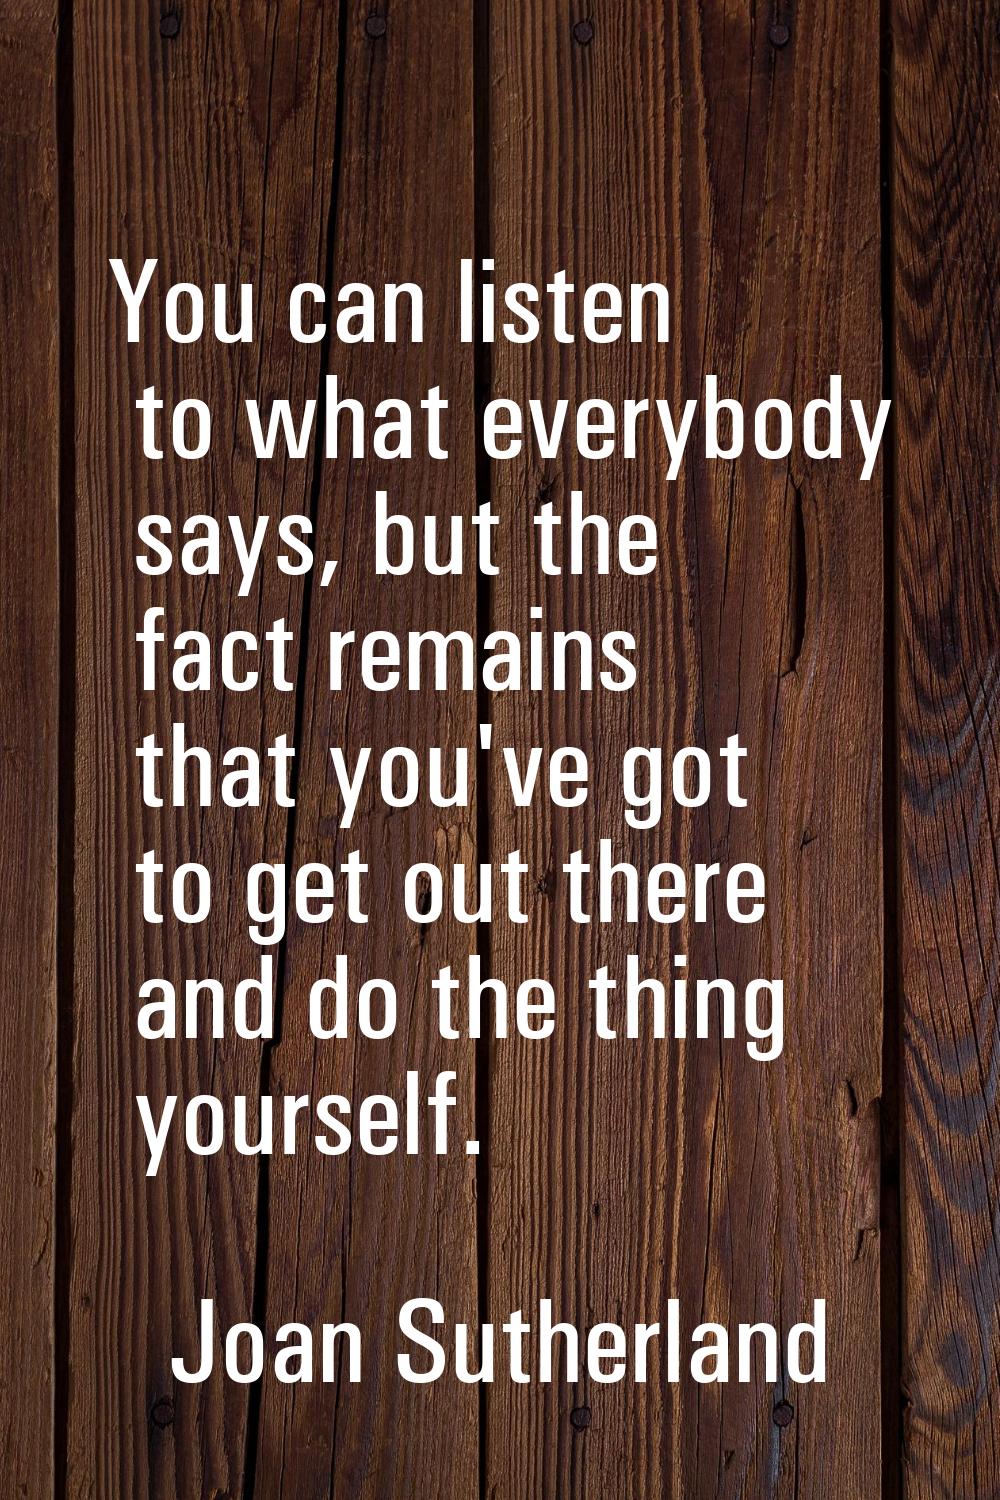 You can listen to what everybody says, but the fact remains that you've got to get out there and do